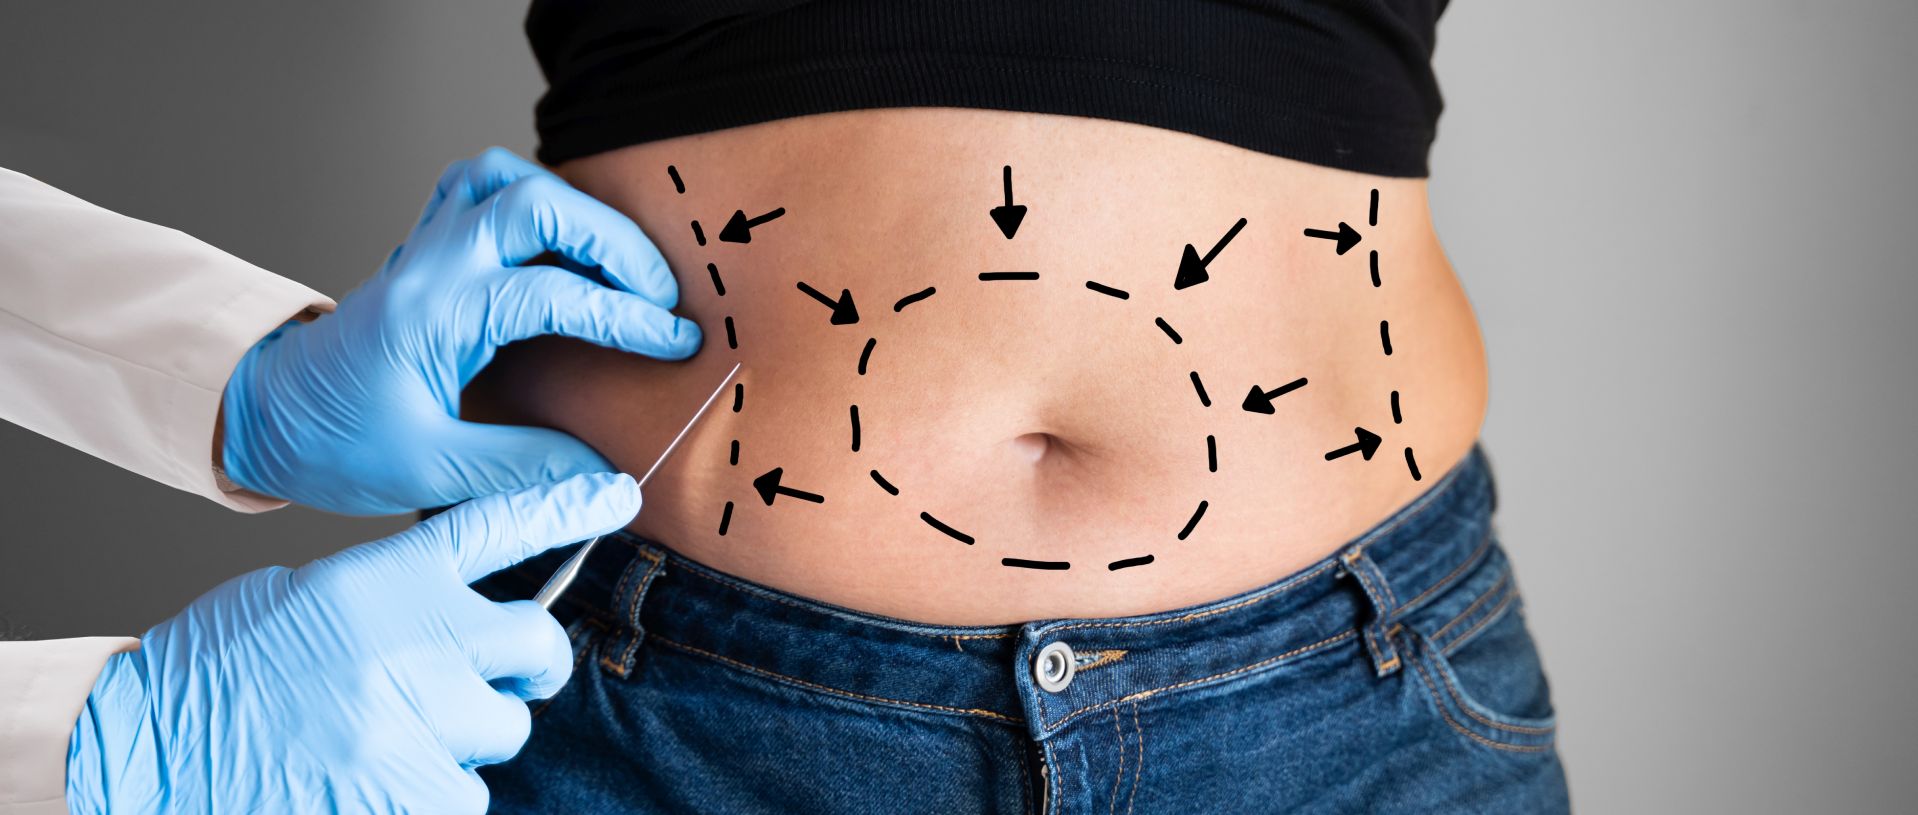 Surgical marking on a belly of a patient who is being prepared for excess fat removal and abdominal sculpting surgery.